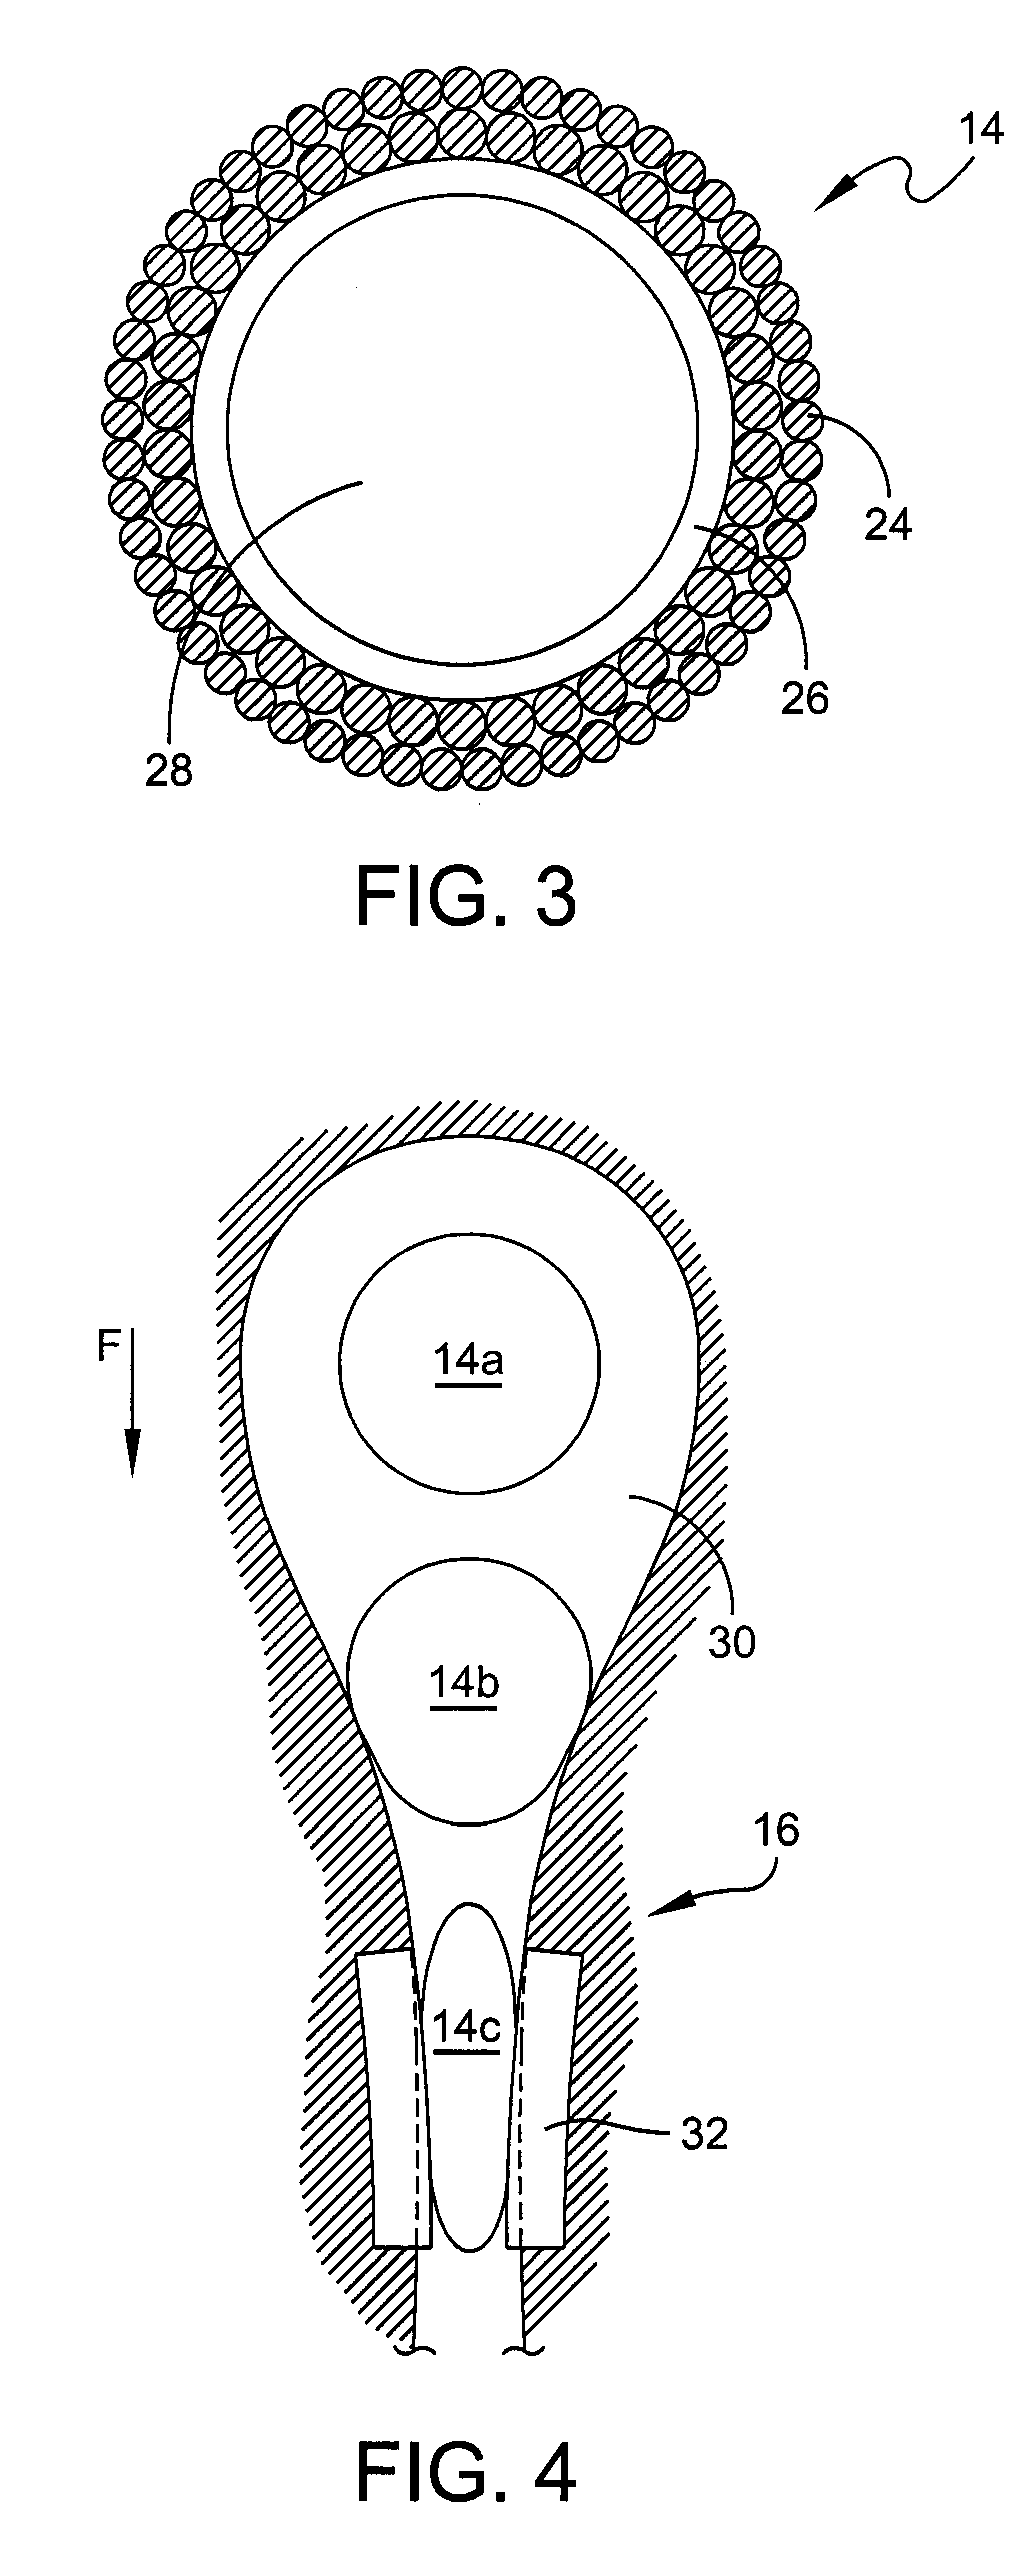 Fairlead for a tow cable handling system